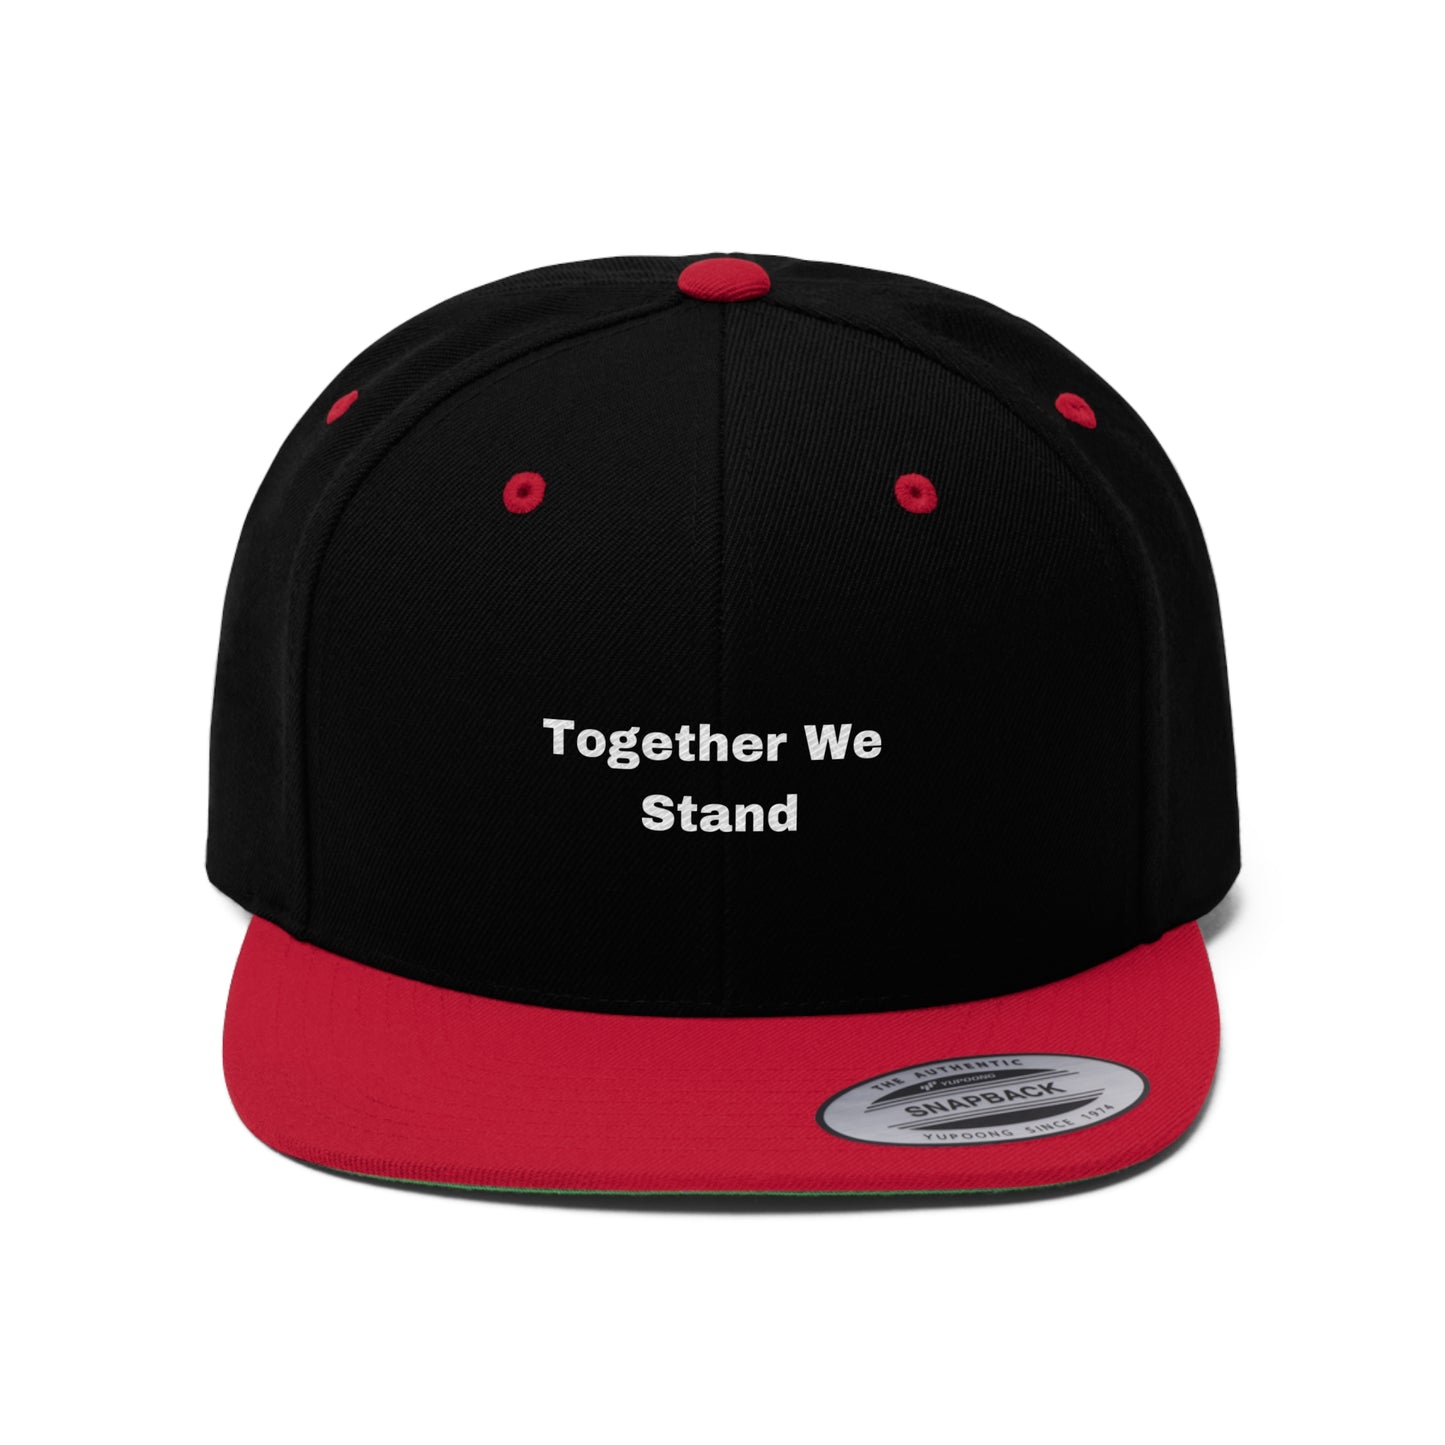 Together We Stand Flat Bill Hat